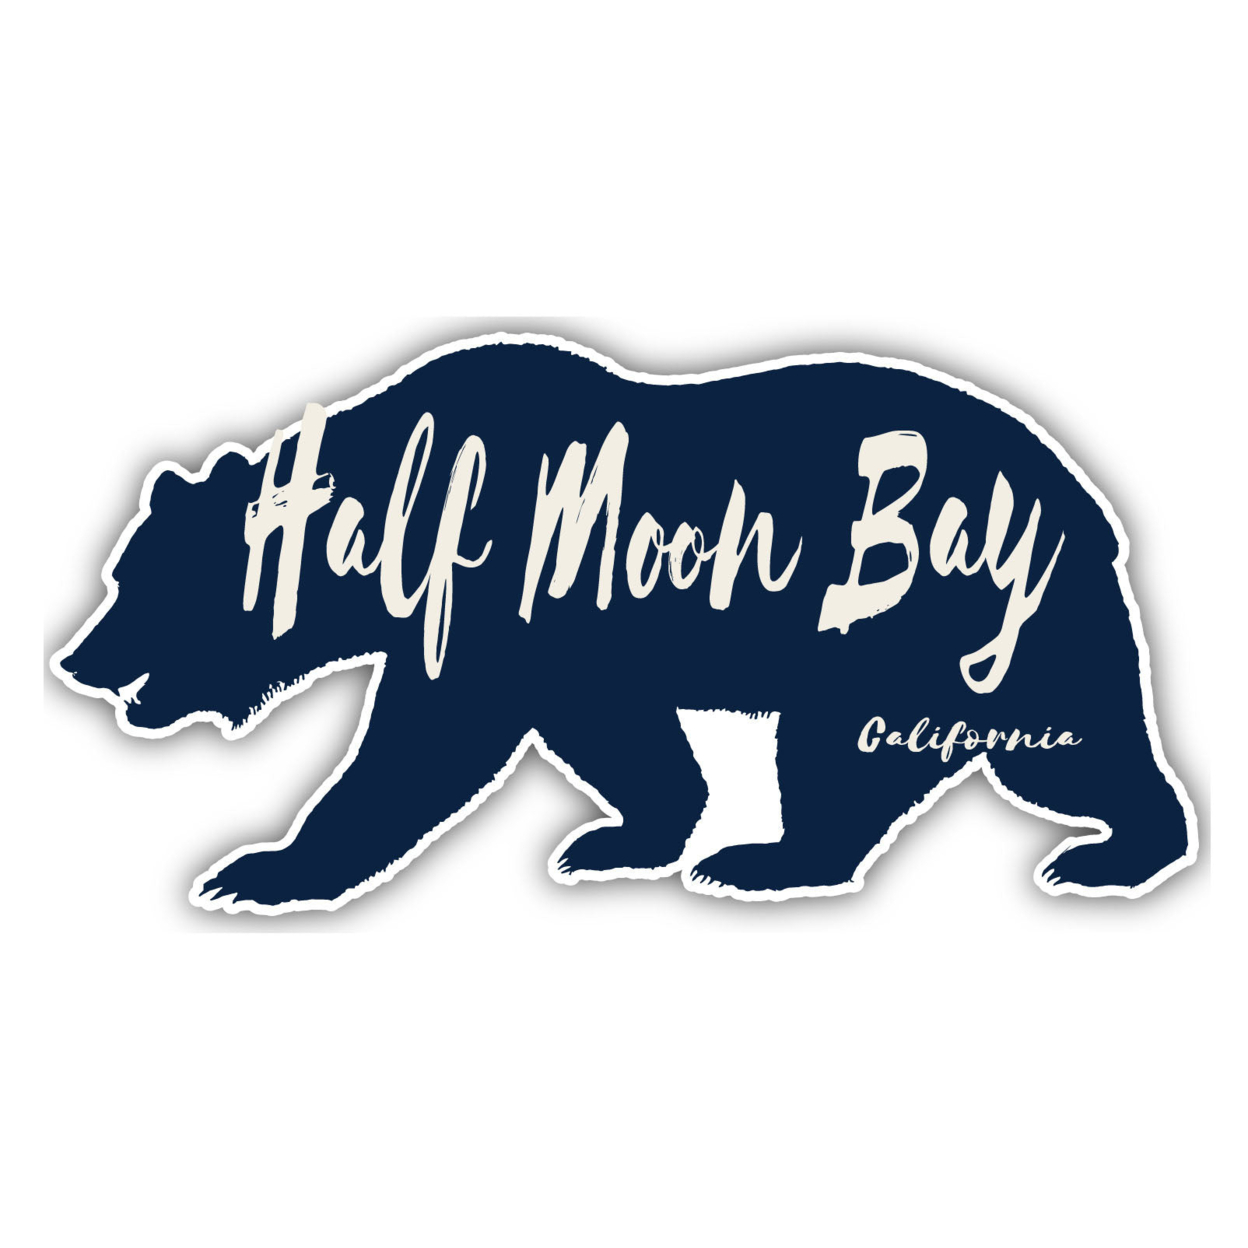 Half Moon Bay California Souvenir Decorative Stickers (Choose Theme And Size) - 4-Pack, 6-Inch, Camp Life